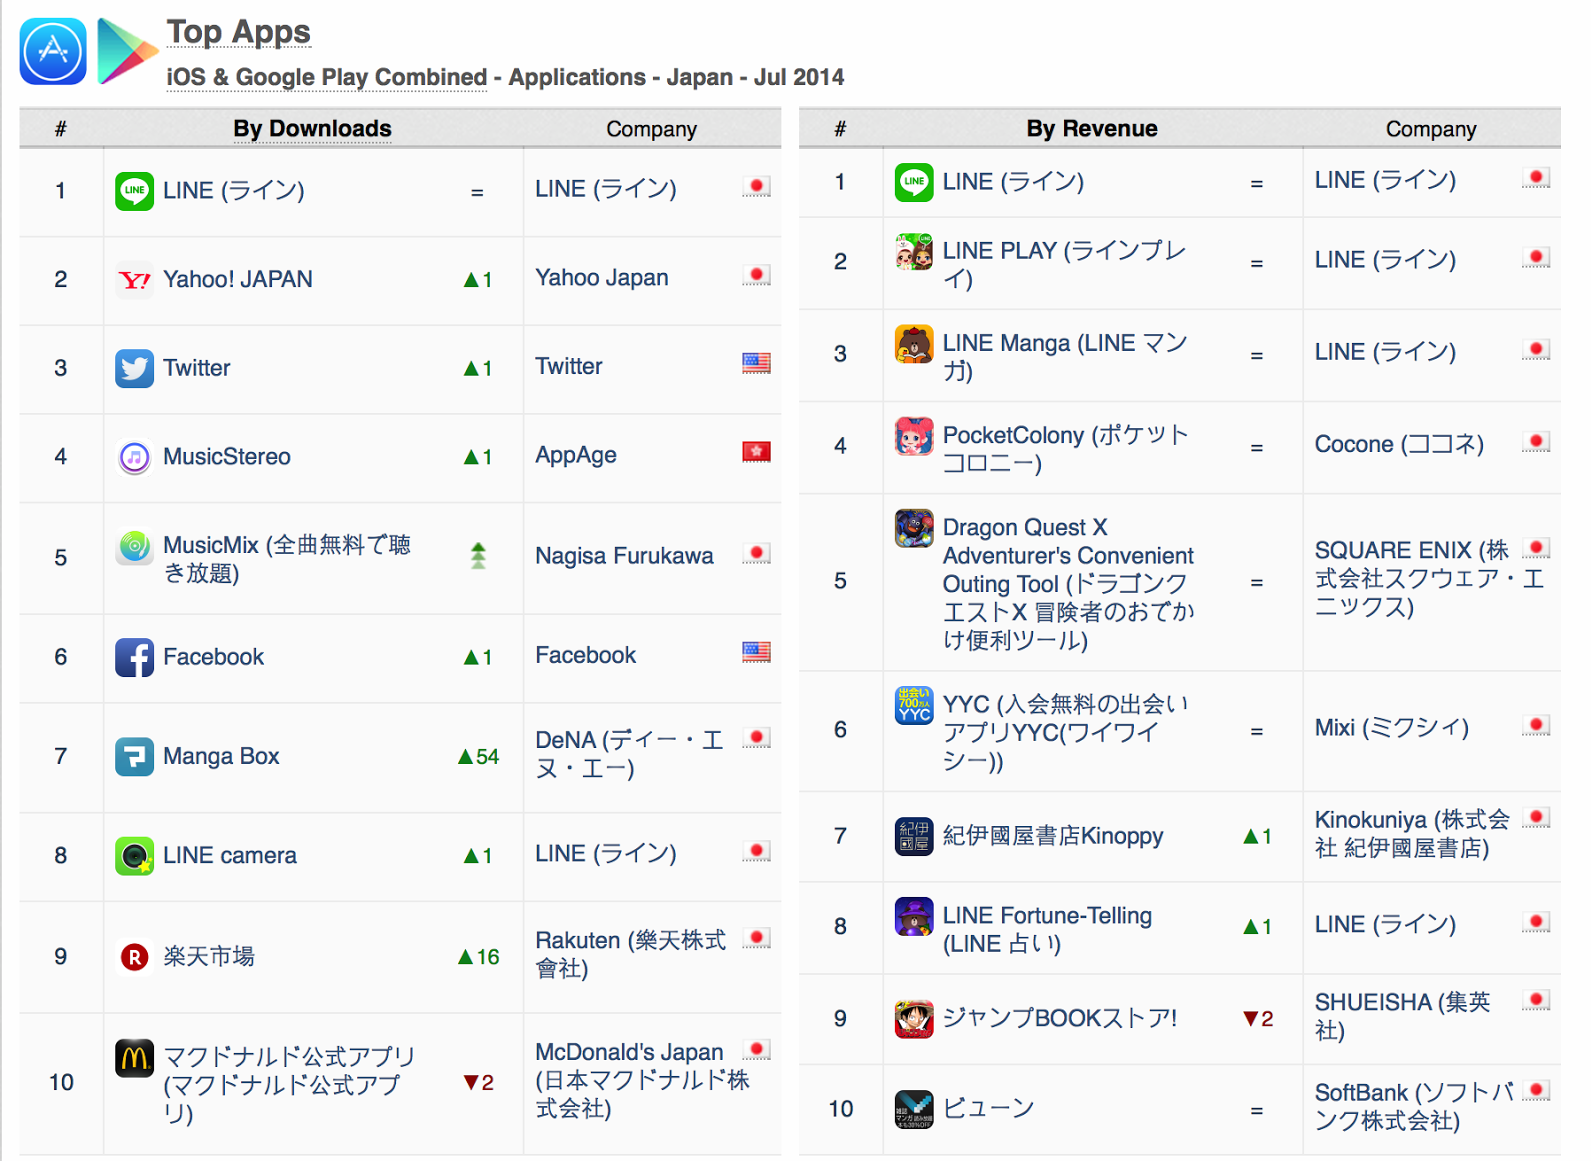 japan-top-apps-ios-google-play-apps-downloads-july-2014